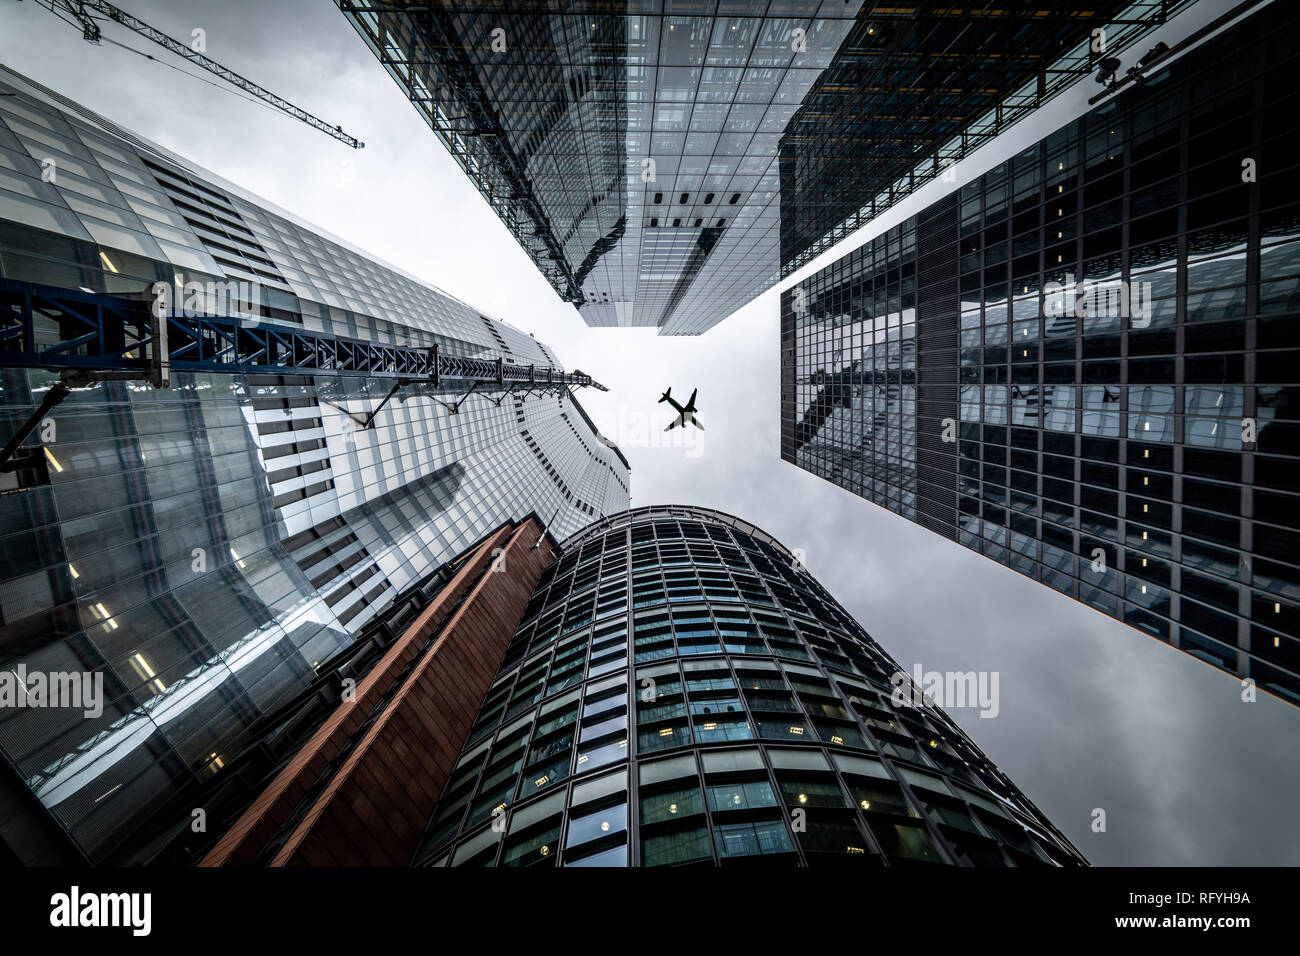 Silhouette of a jet plane flying low over Three different kind of architecture with commercial office buildings exterior in London Stock Photo